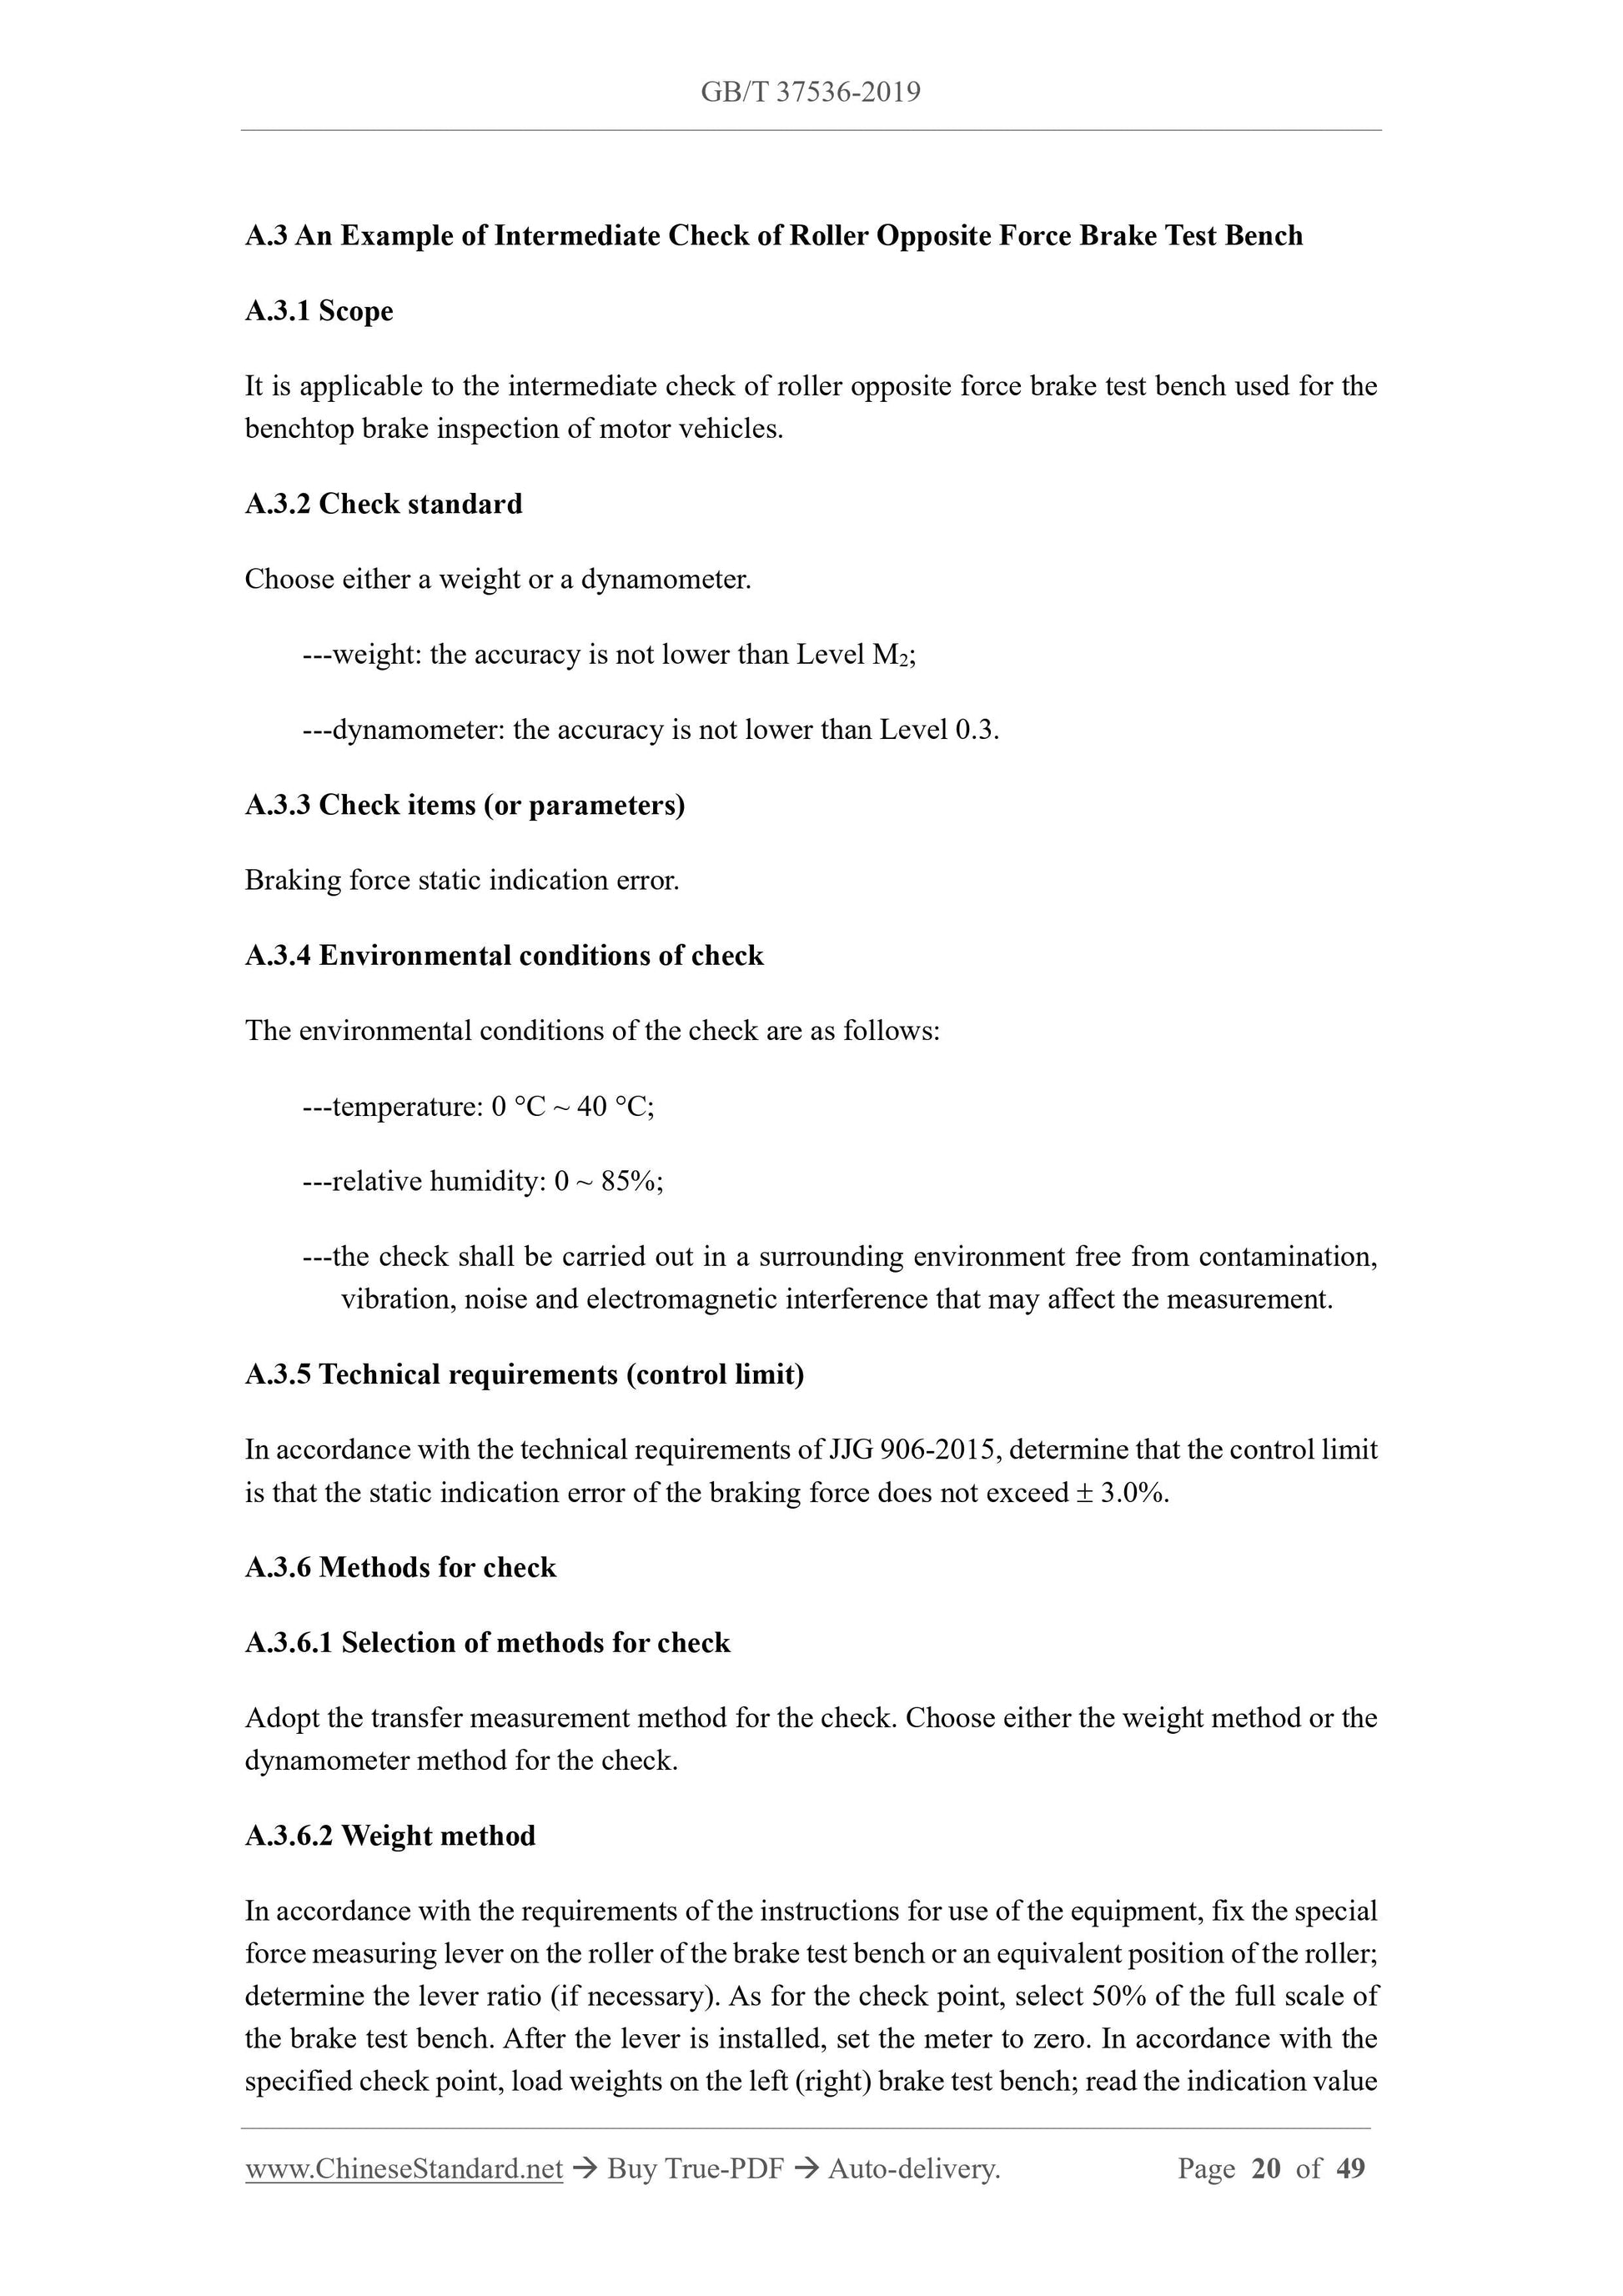 GB/T 37536-2019 Page 8